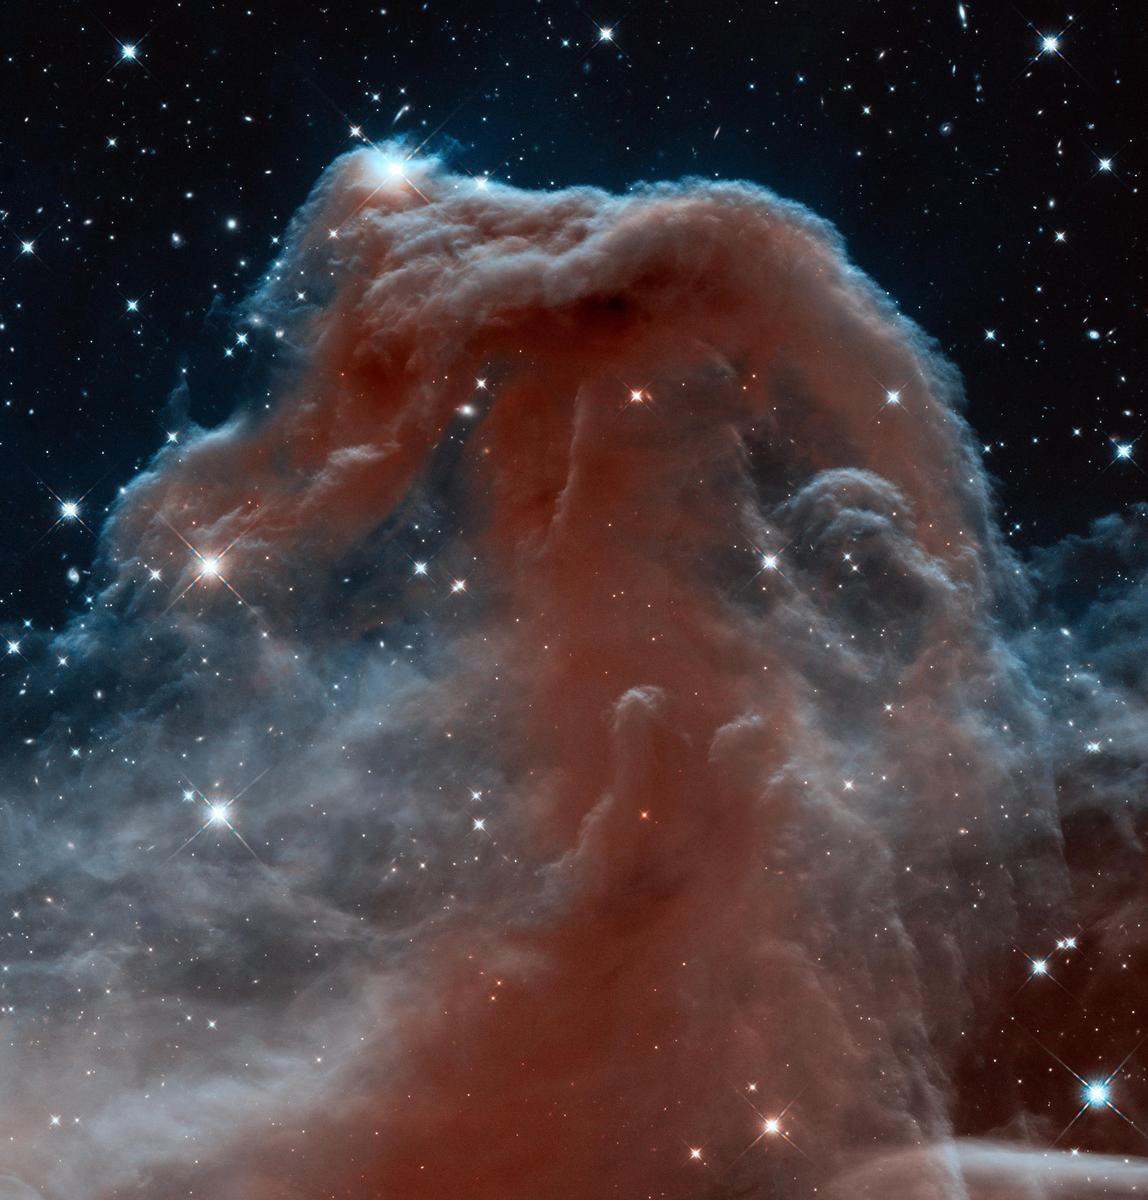 New infrared view of the Horsehead Nebul